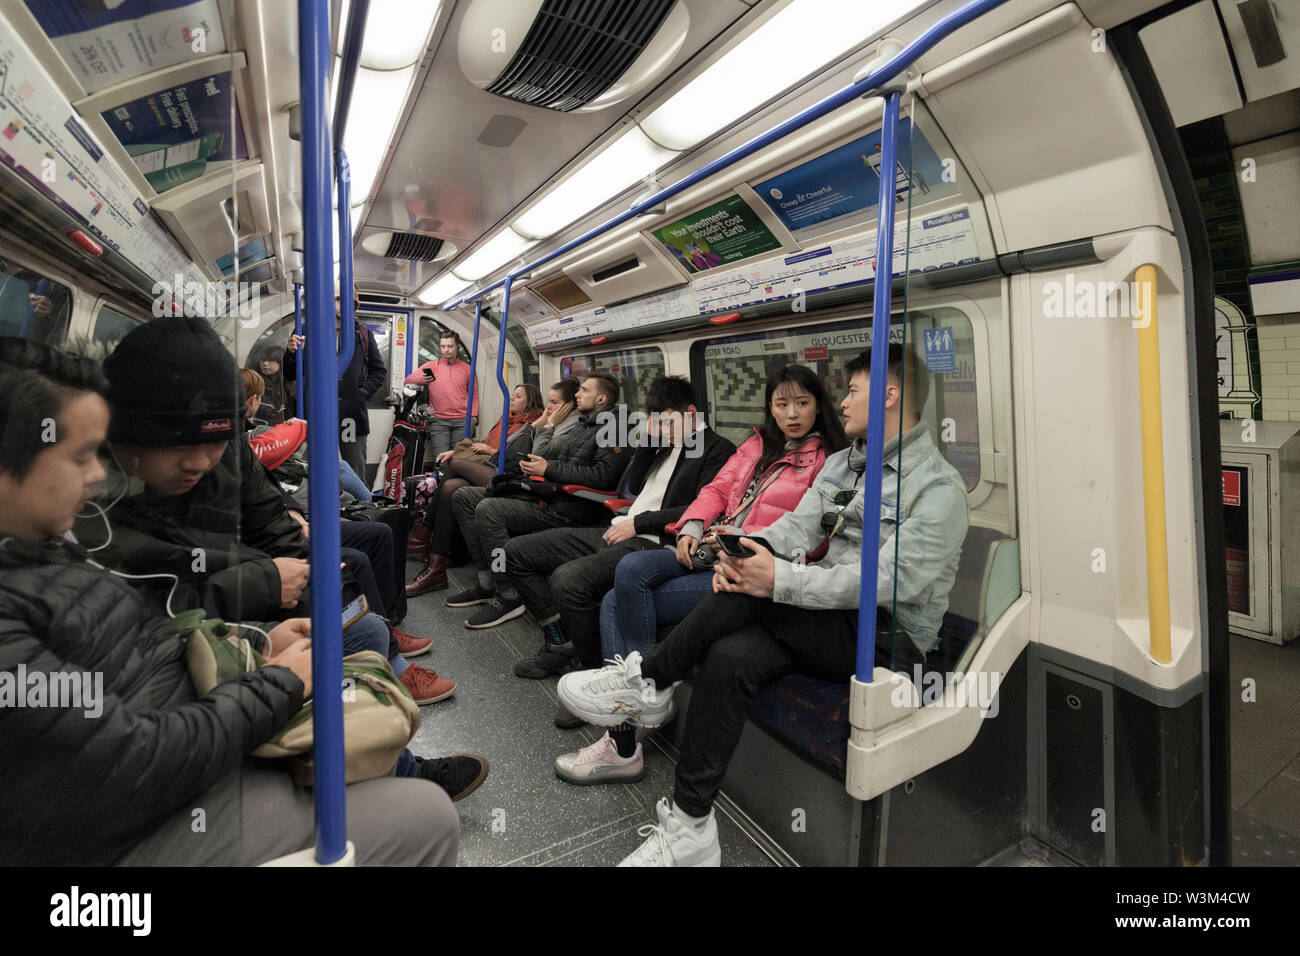 Passengers on a London Underground / London Tube eastbound Piccadilly line underground train heading in to London Stock Photo